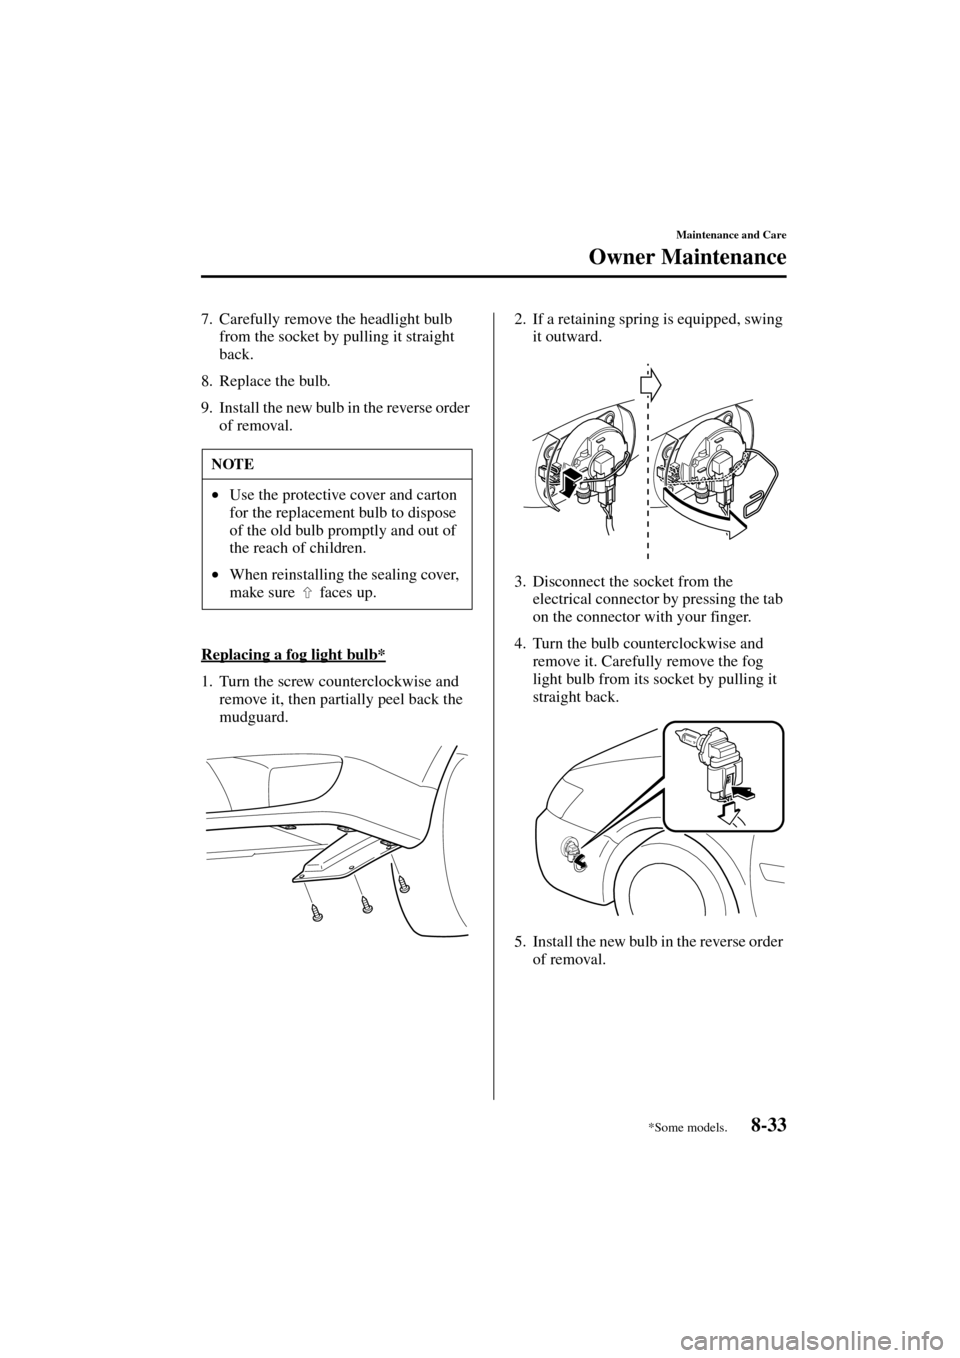 MAZDA MODEL MPV 2004  Owners Manual (in English) 8-33
Maintenance and Care
Owner Maintenance
Form No. 8S06-EA-03H
7. Carefully remove the headlight bulb 
from the socket by pulling it straight 
back.
8. Replace the bulb.
9. Install the new bulb in t